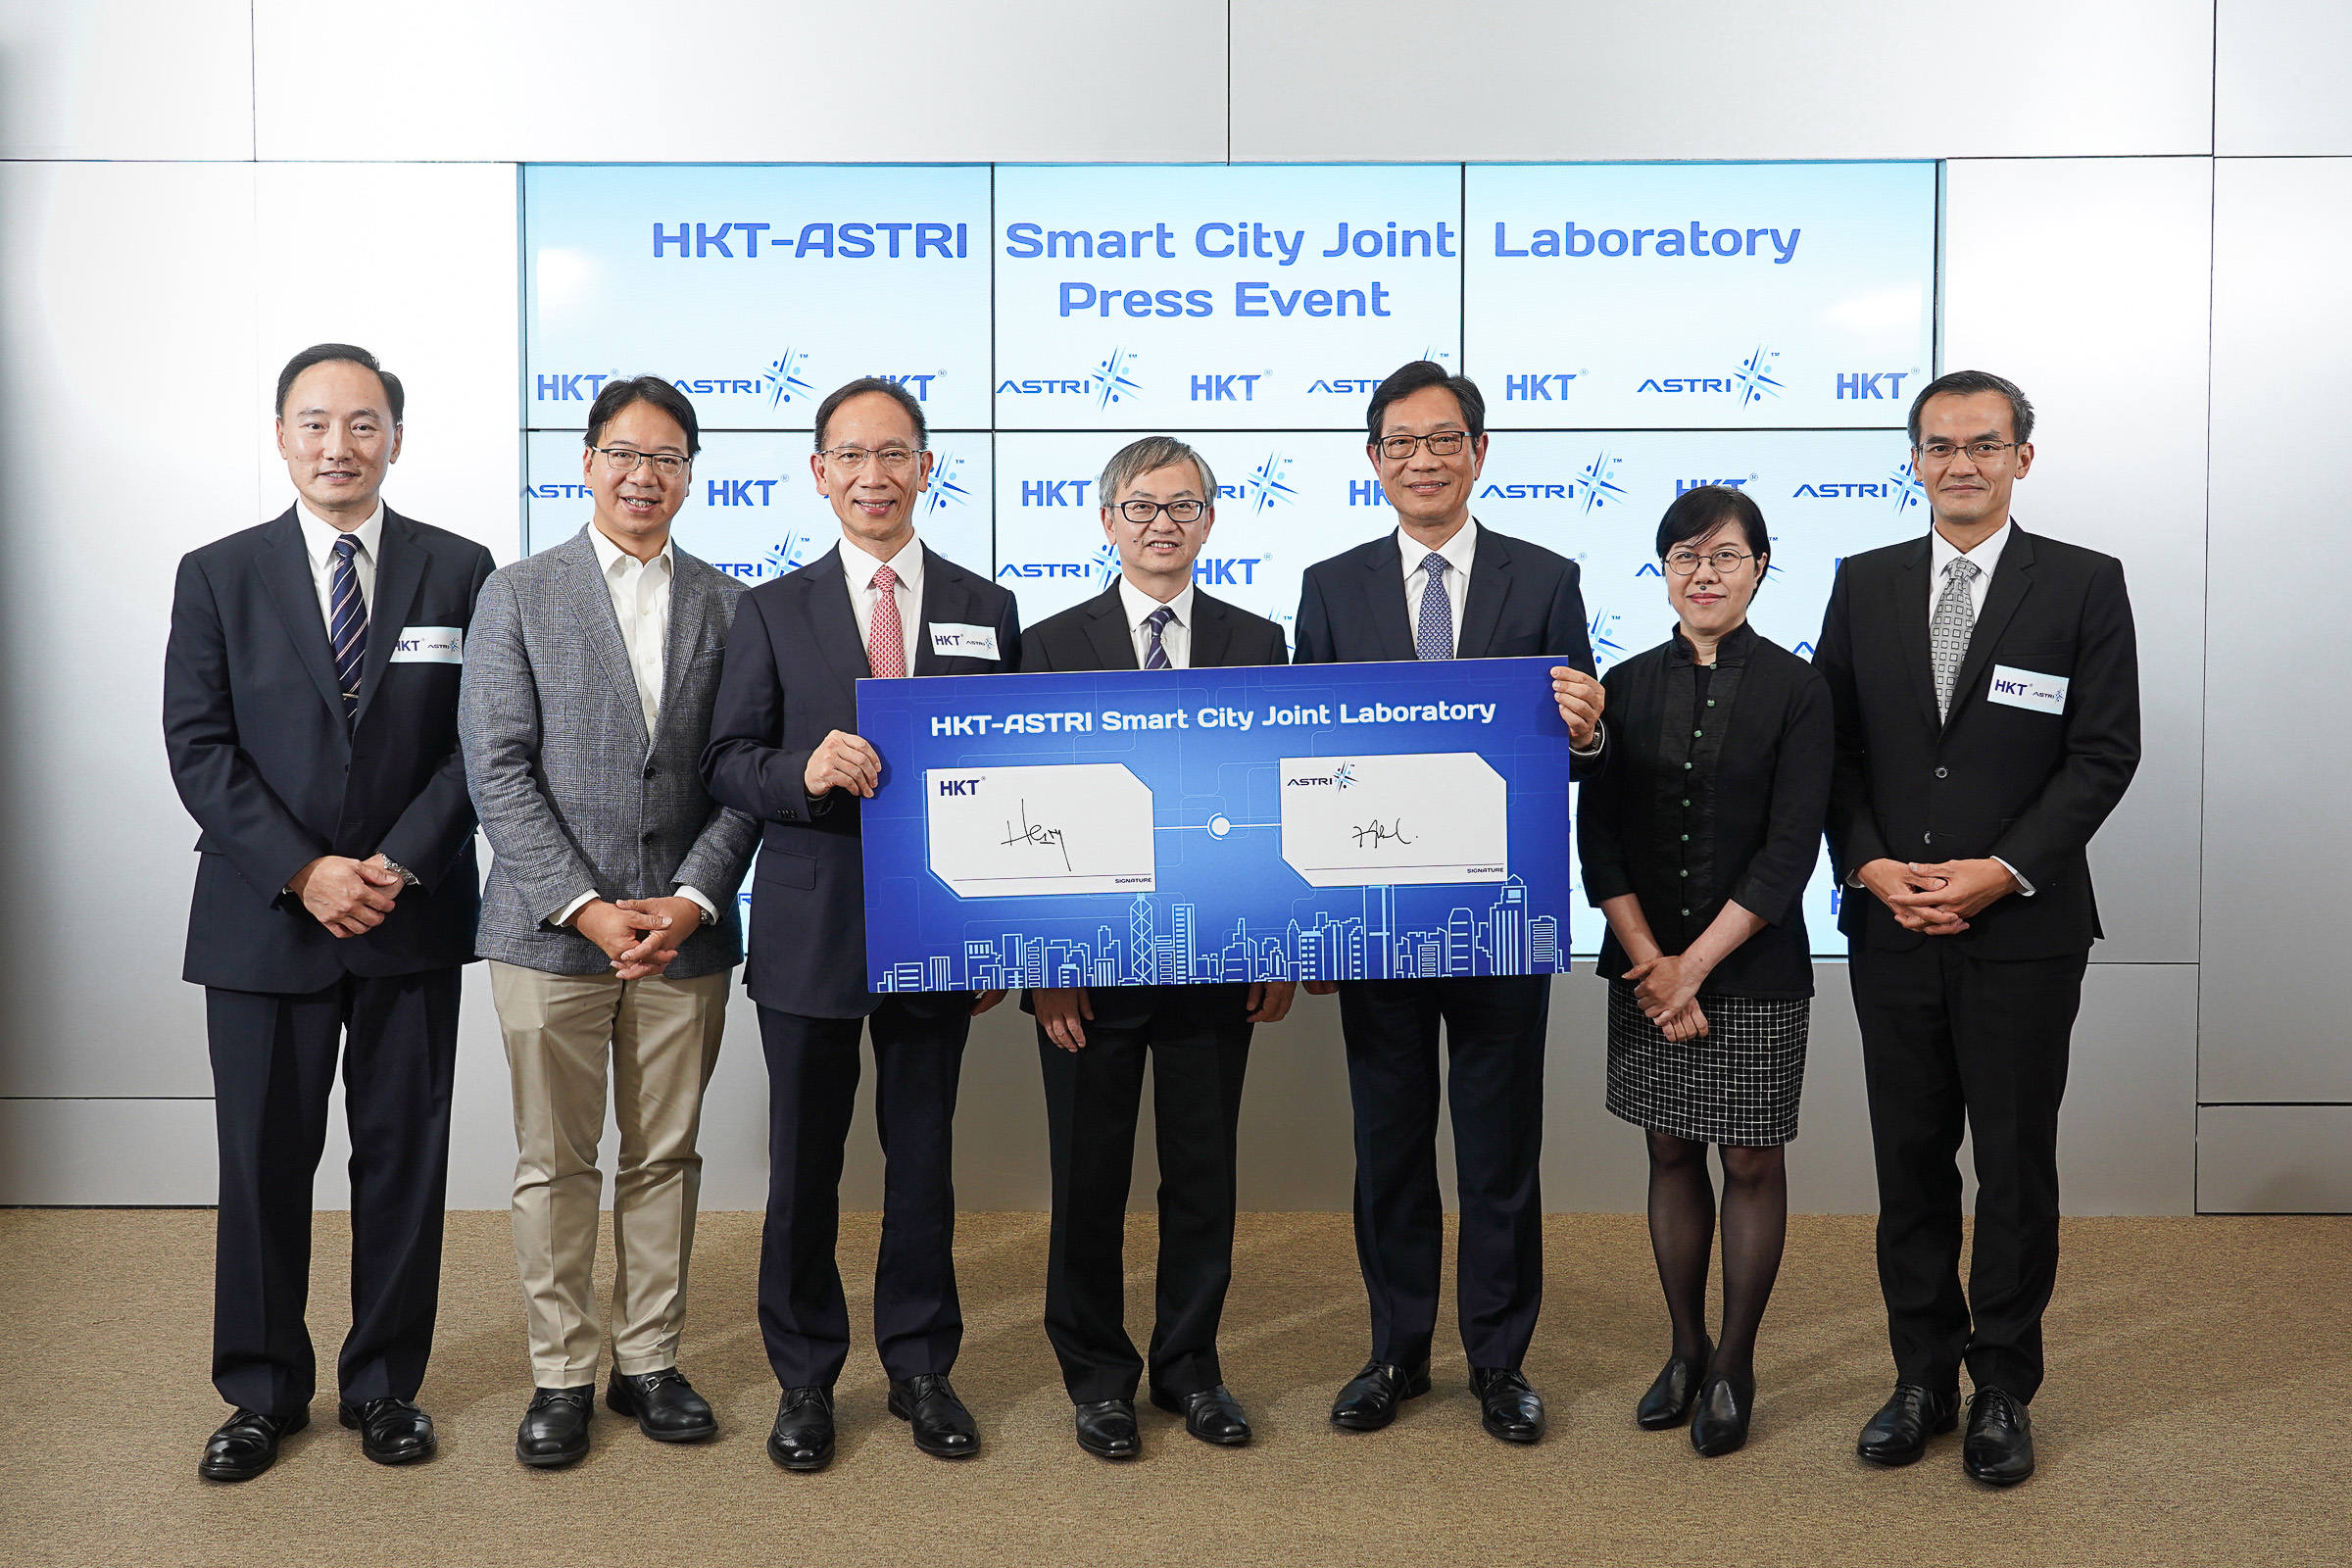 Hkt And Astri Innovation Partnership In Pursuit Of Smart City Solutions For Hong Kong Astri Hong Kong Applied Science And Technology Research Institute Company Limited